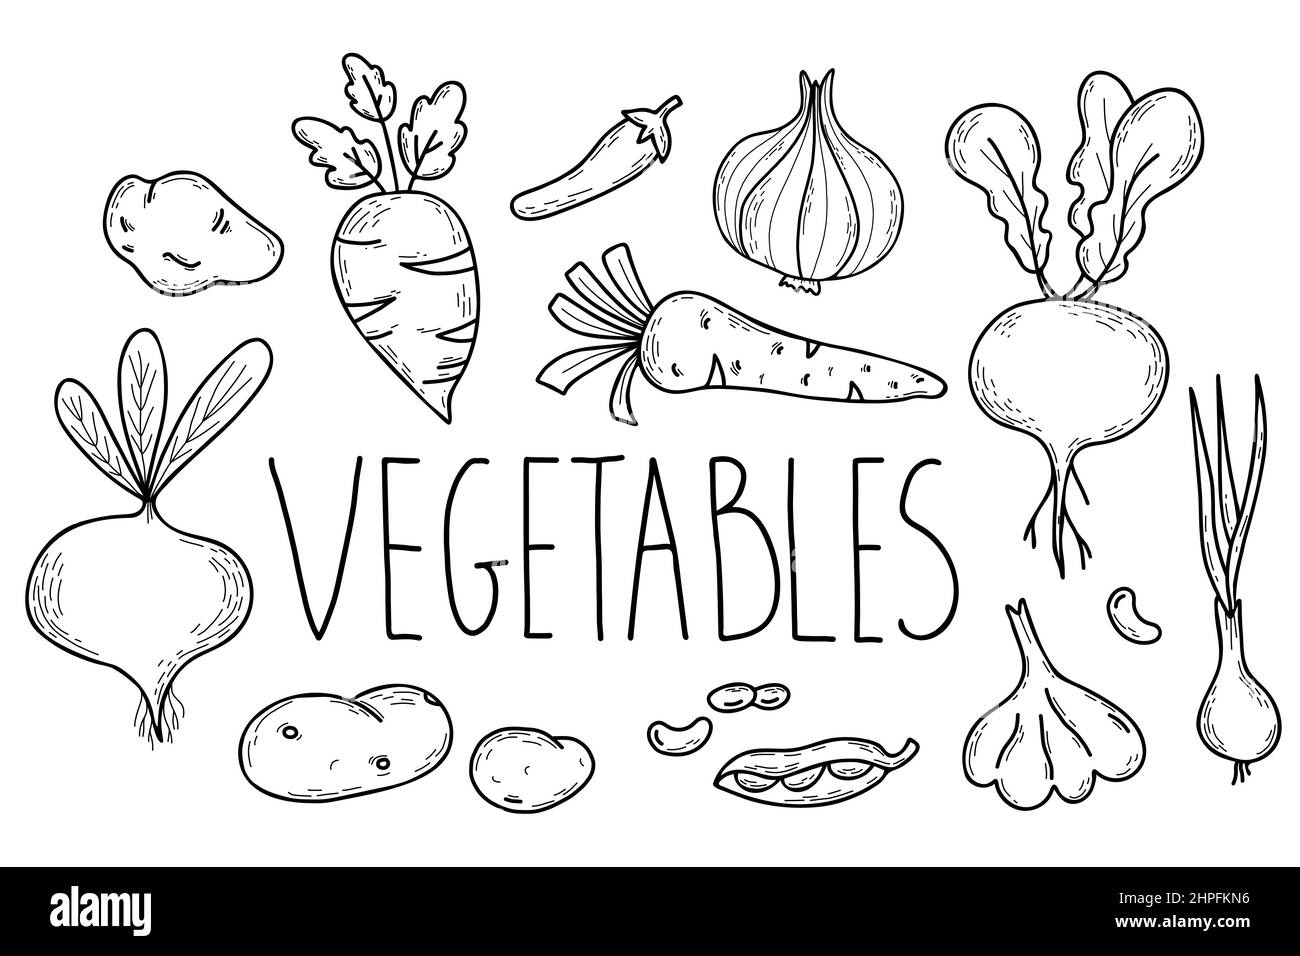 Collection of seasonal root vegetables. Beets and carrots, turnips and potatoes, onions and garlic, peas and chili peppers. Vector illustration Stock Vector